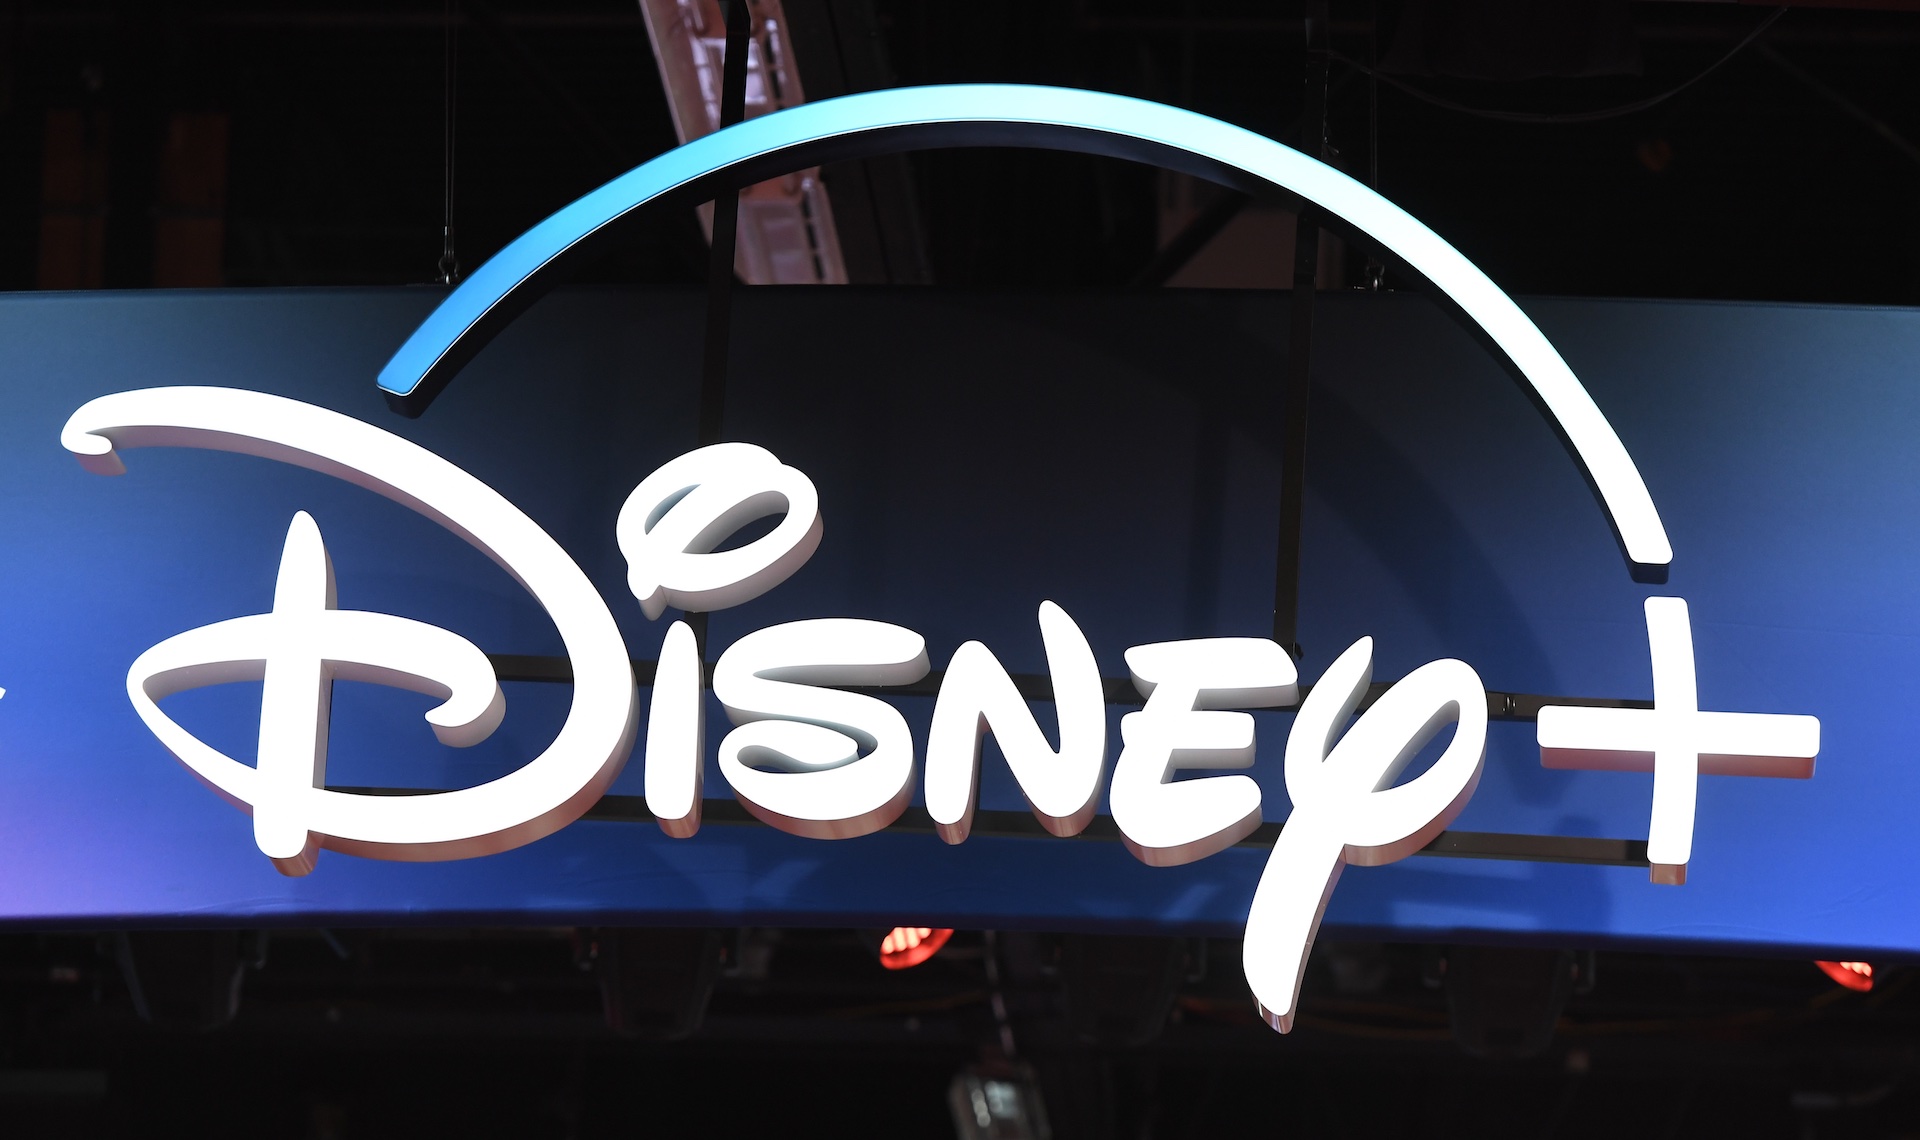  How Much is Disney Plus? A Look at the Disney Plus Price in 2022